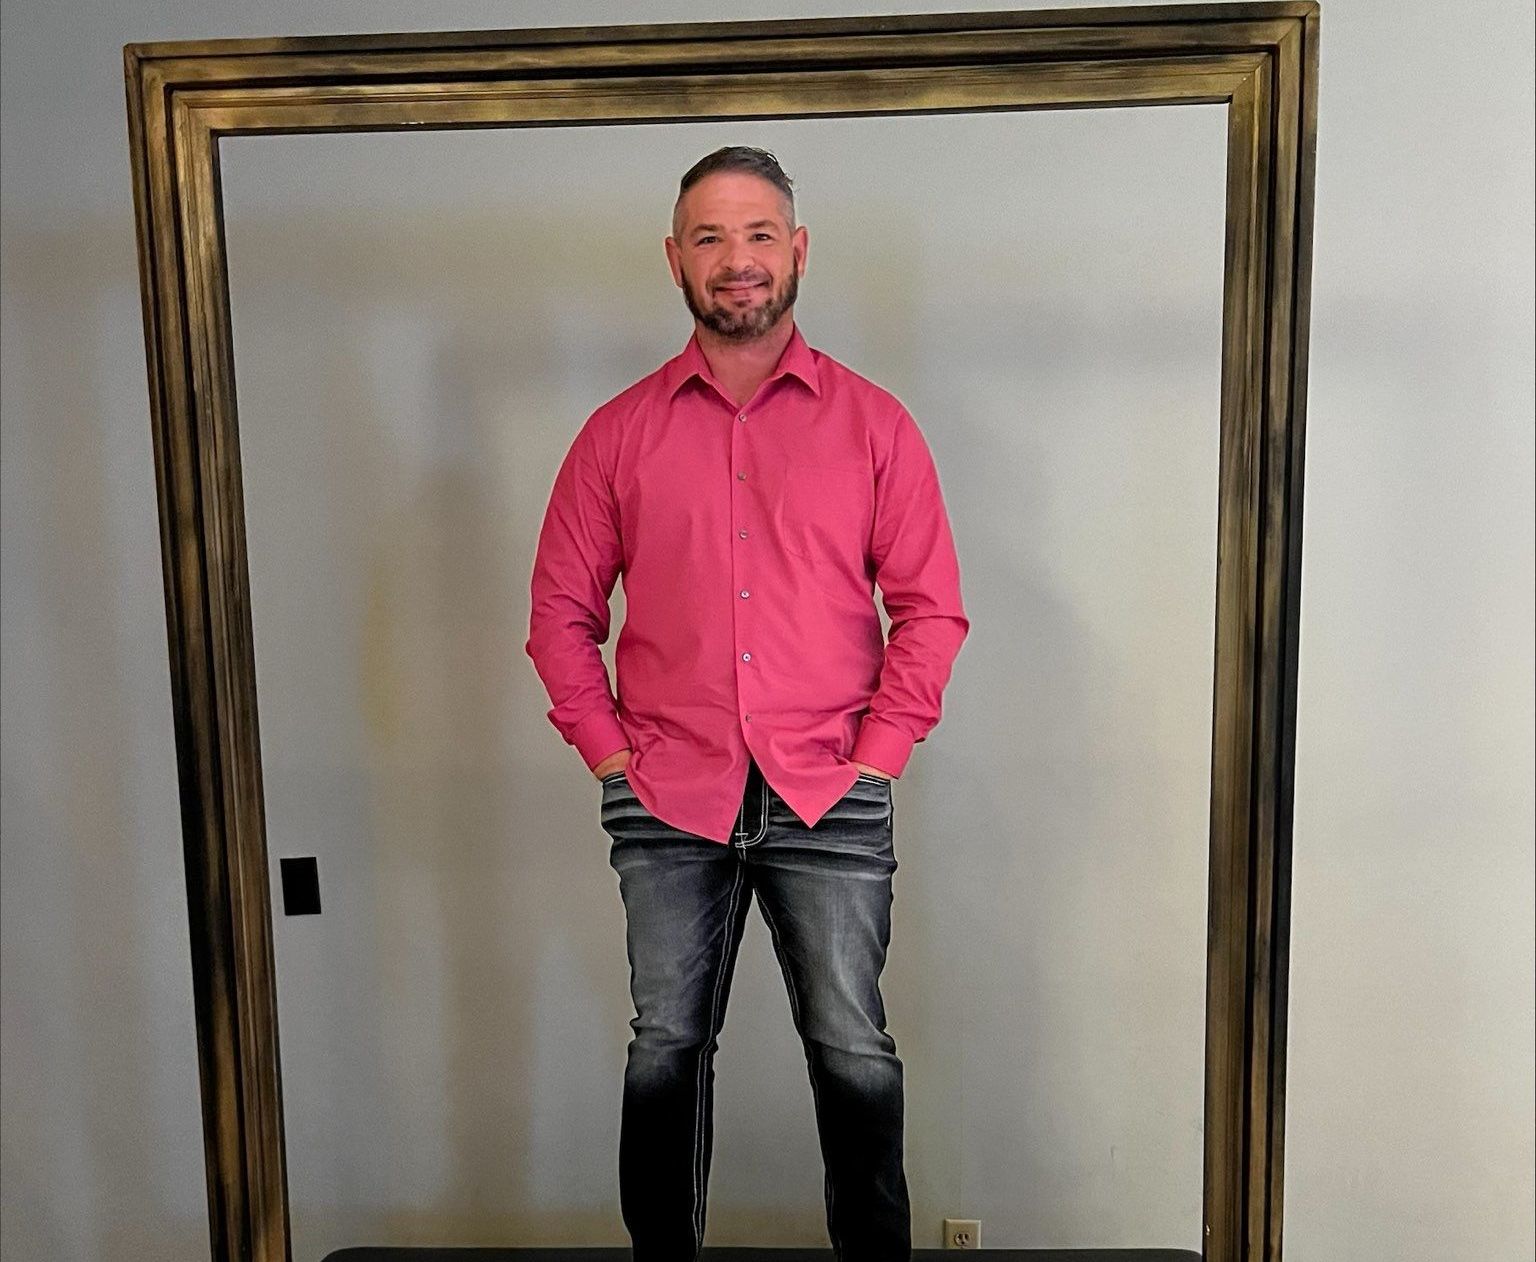 A man in a pink shirt is standing in a picture frame.